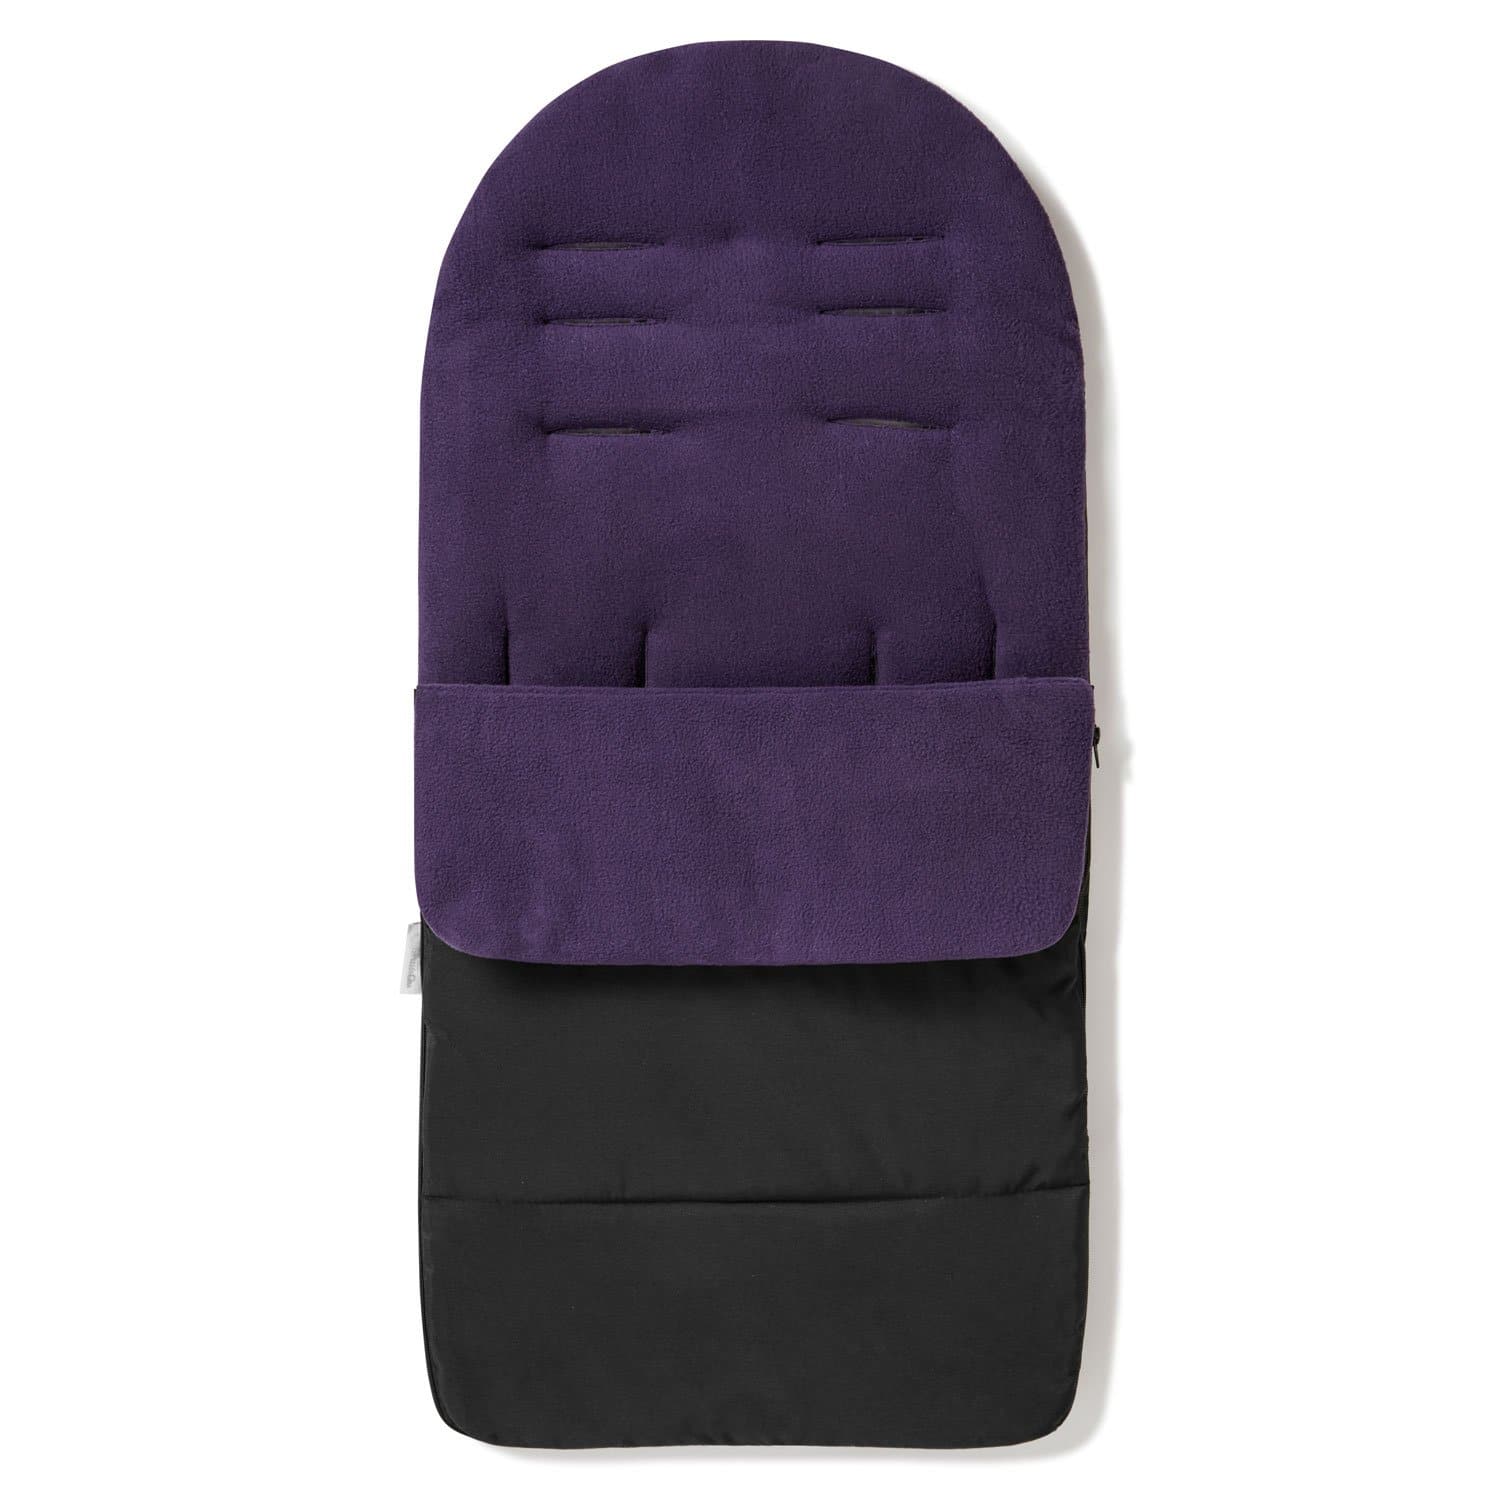 Premium Footmuff / Cosy Toes Compatible with XTS - Plum Purple / Fits All Models | For Your Little One